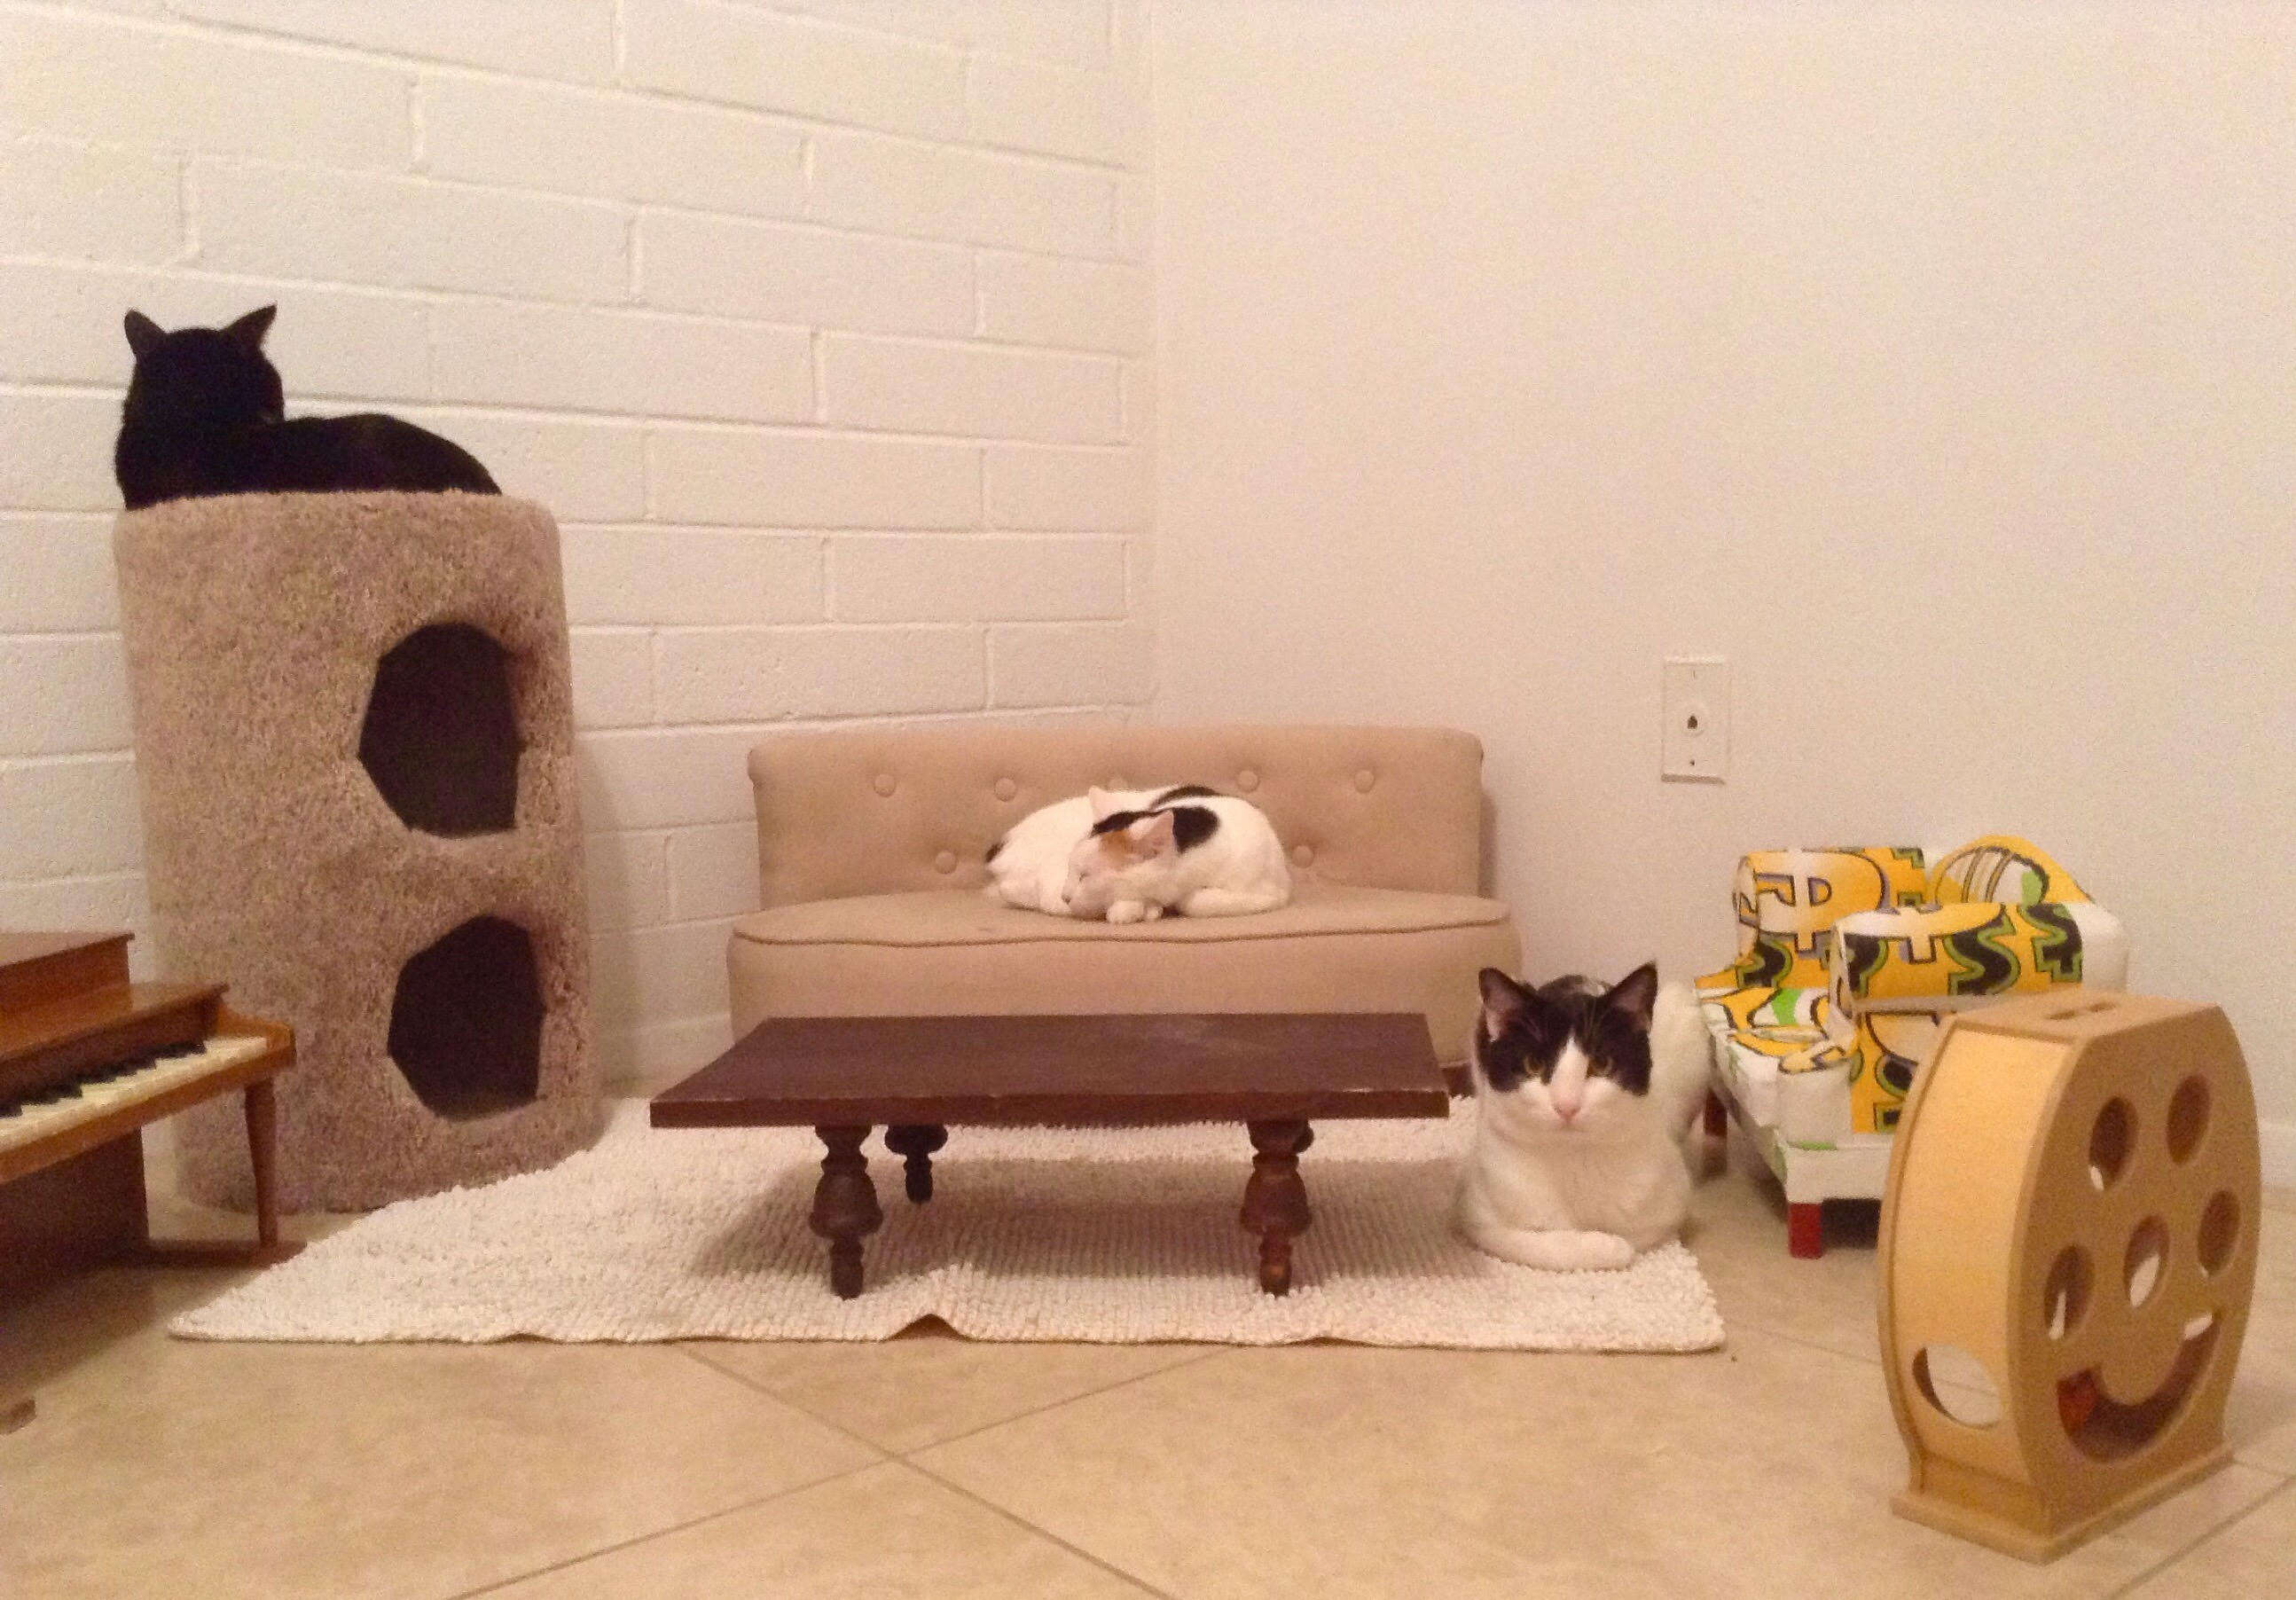 Cats hanging out in a cat-sized living room